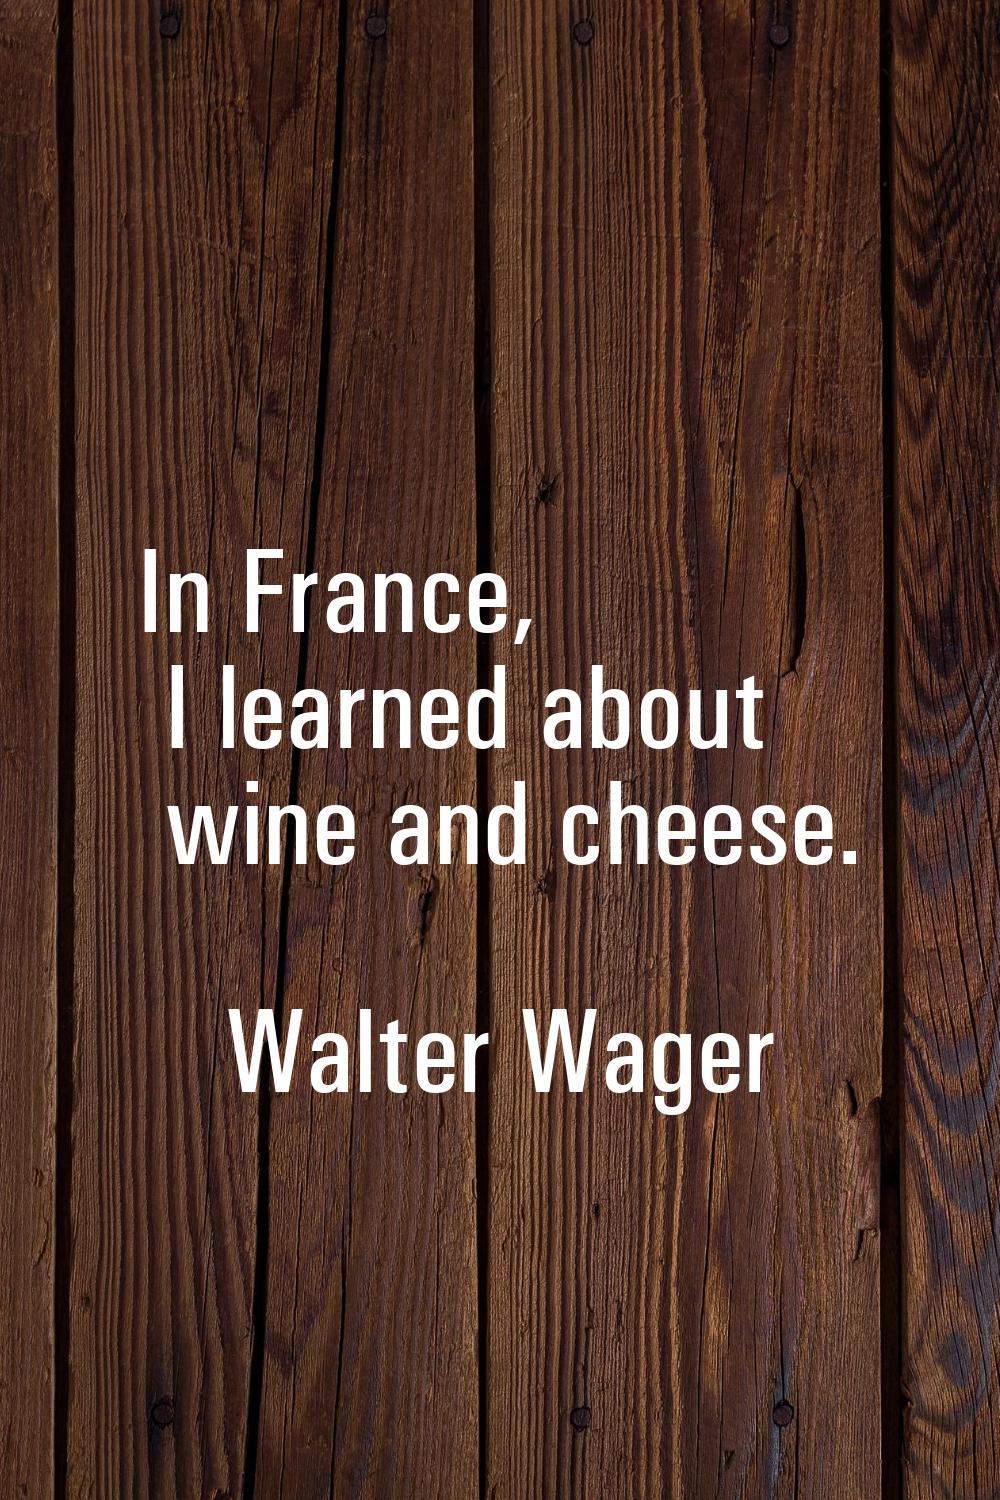 In France, I learned about wine and cheese.